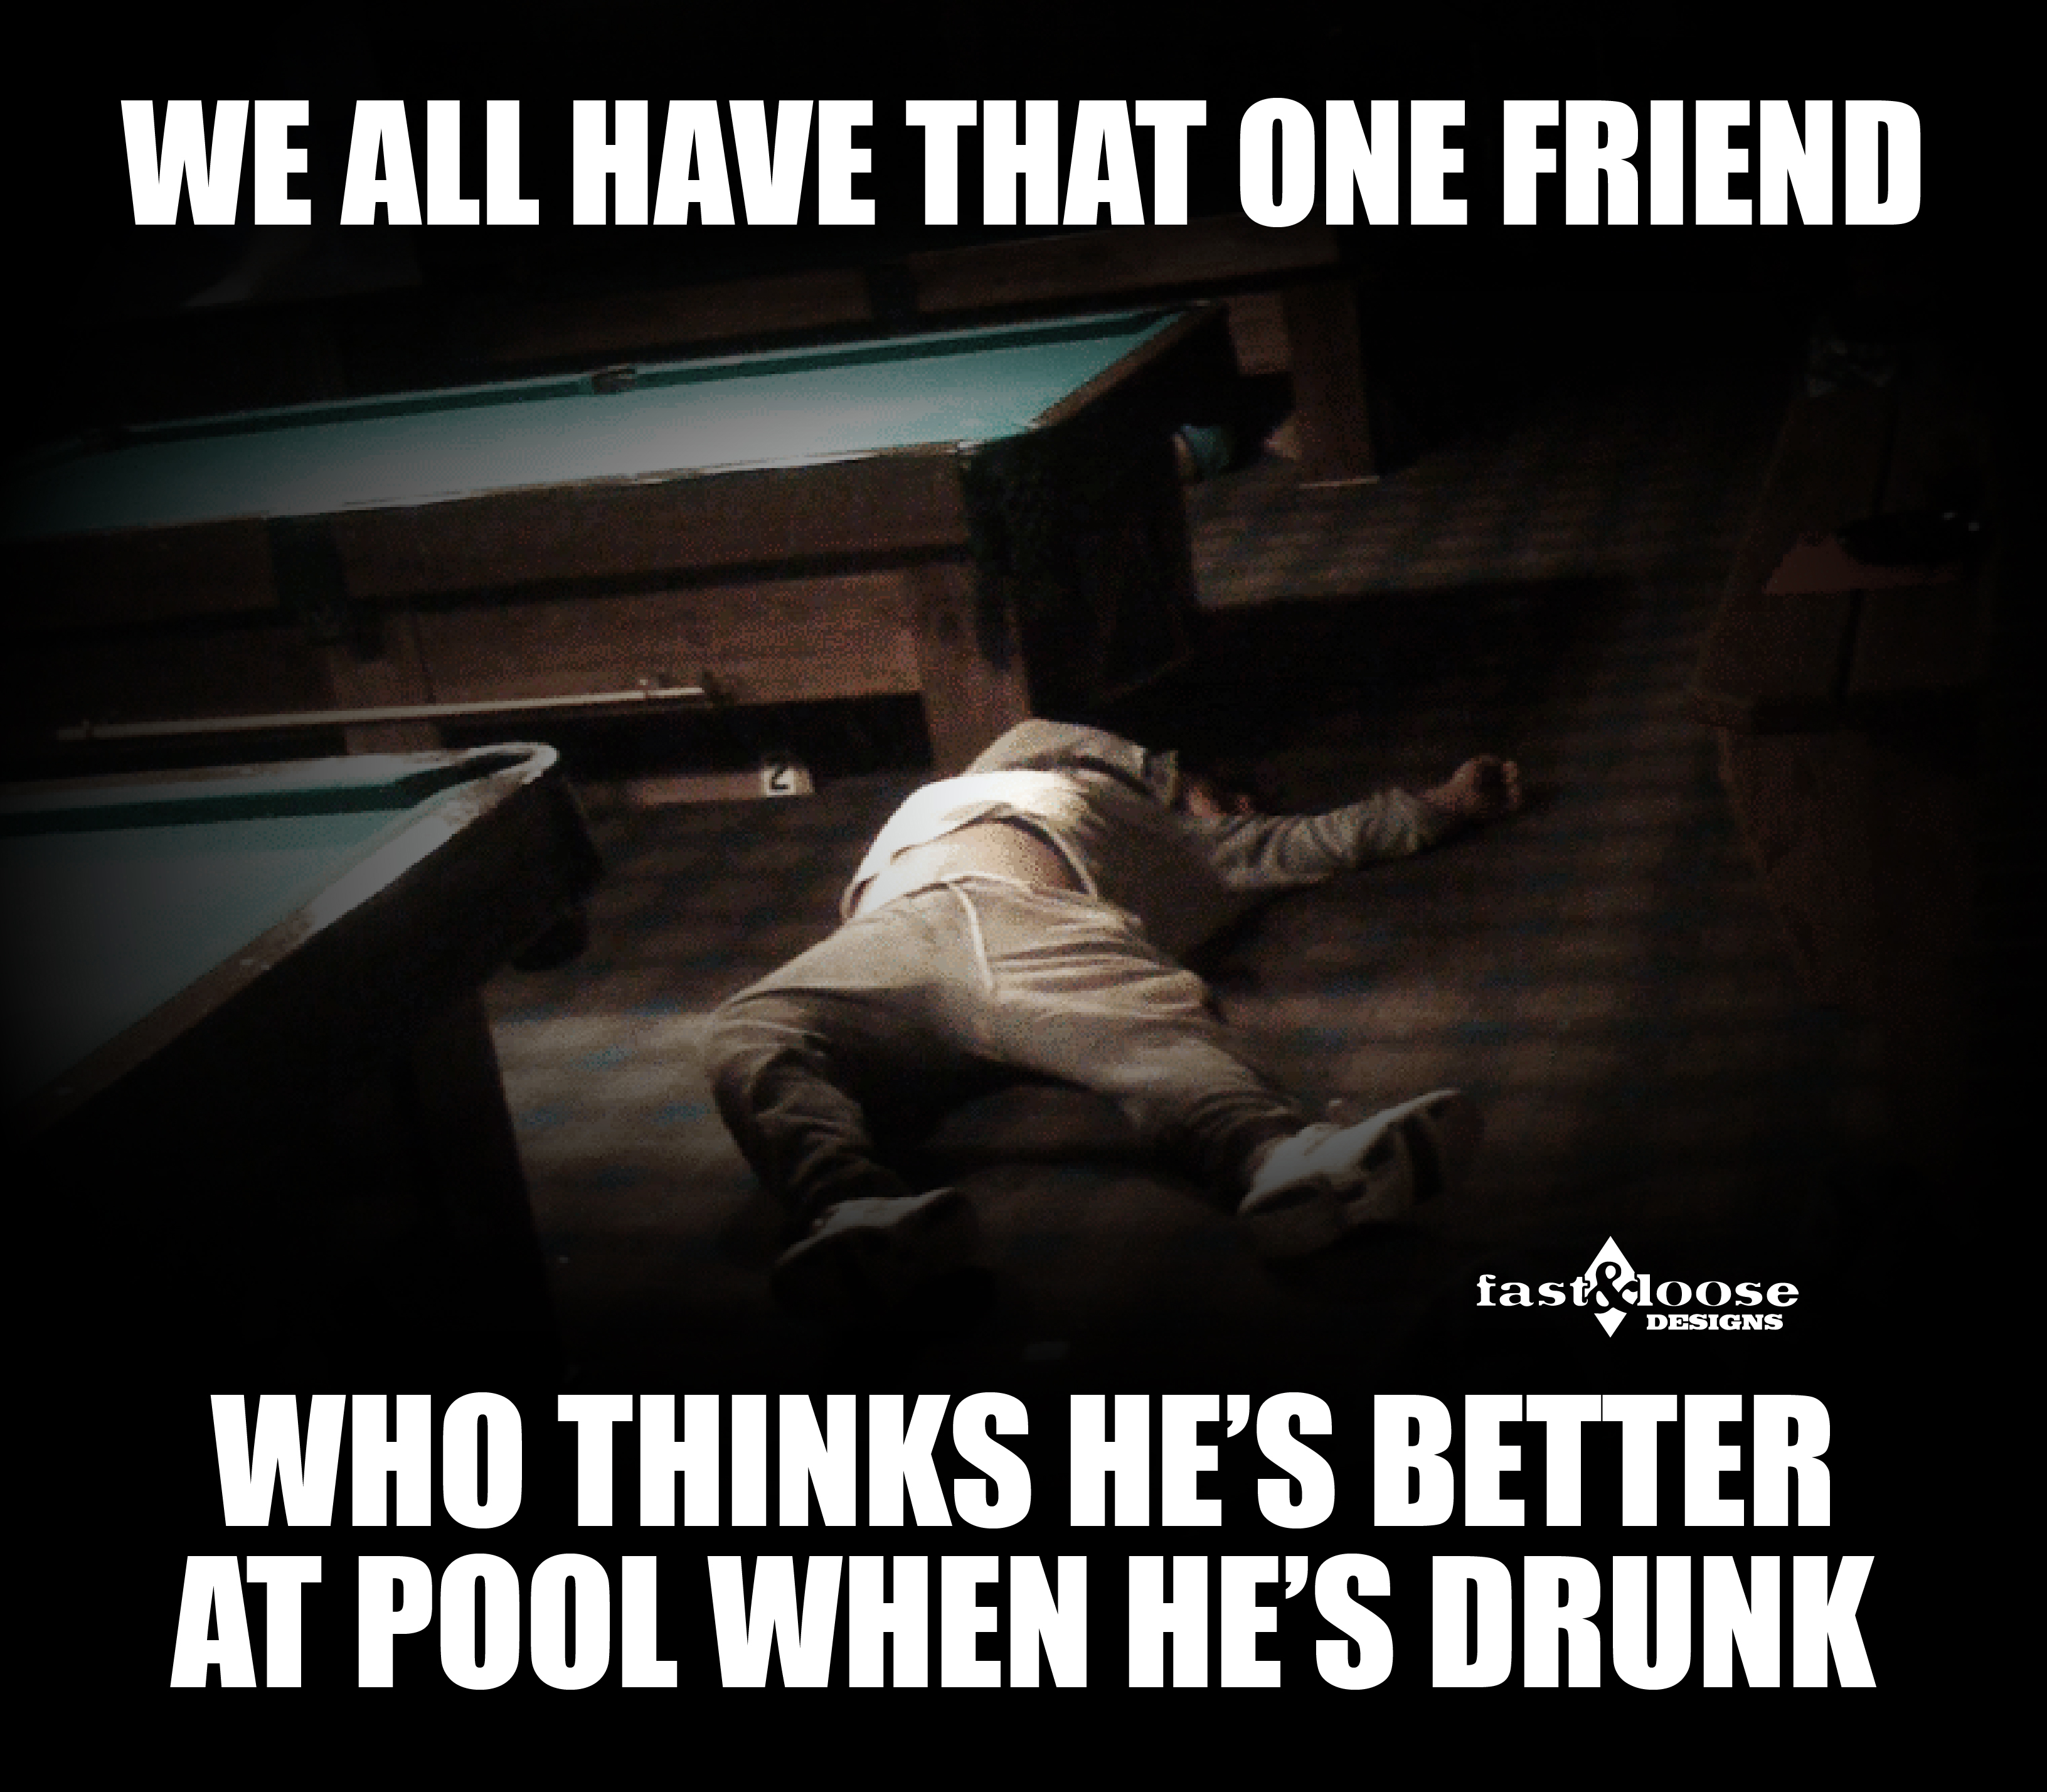 We all have that one friend who thinks he's better at pool when he's drunk